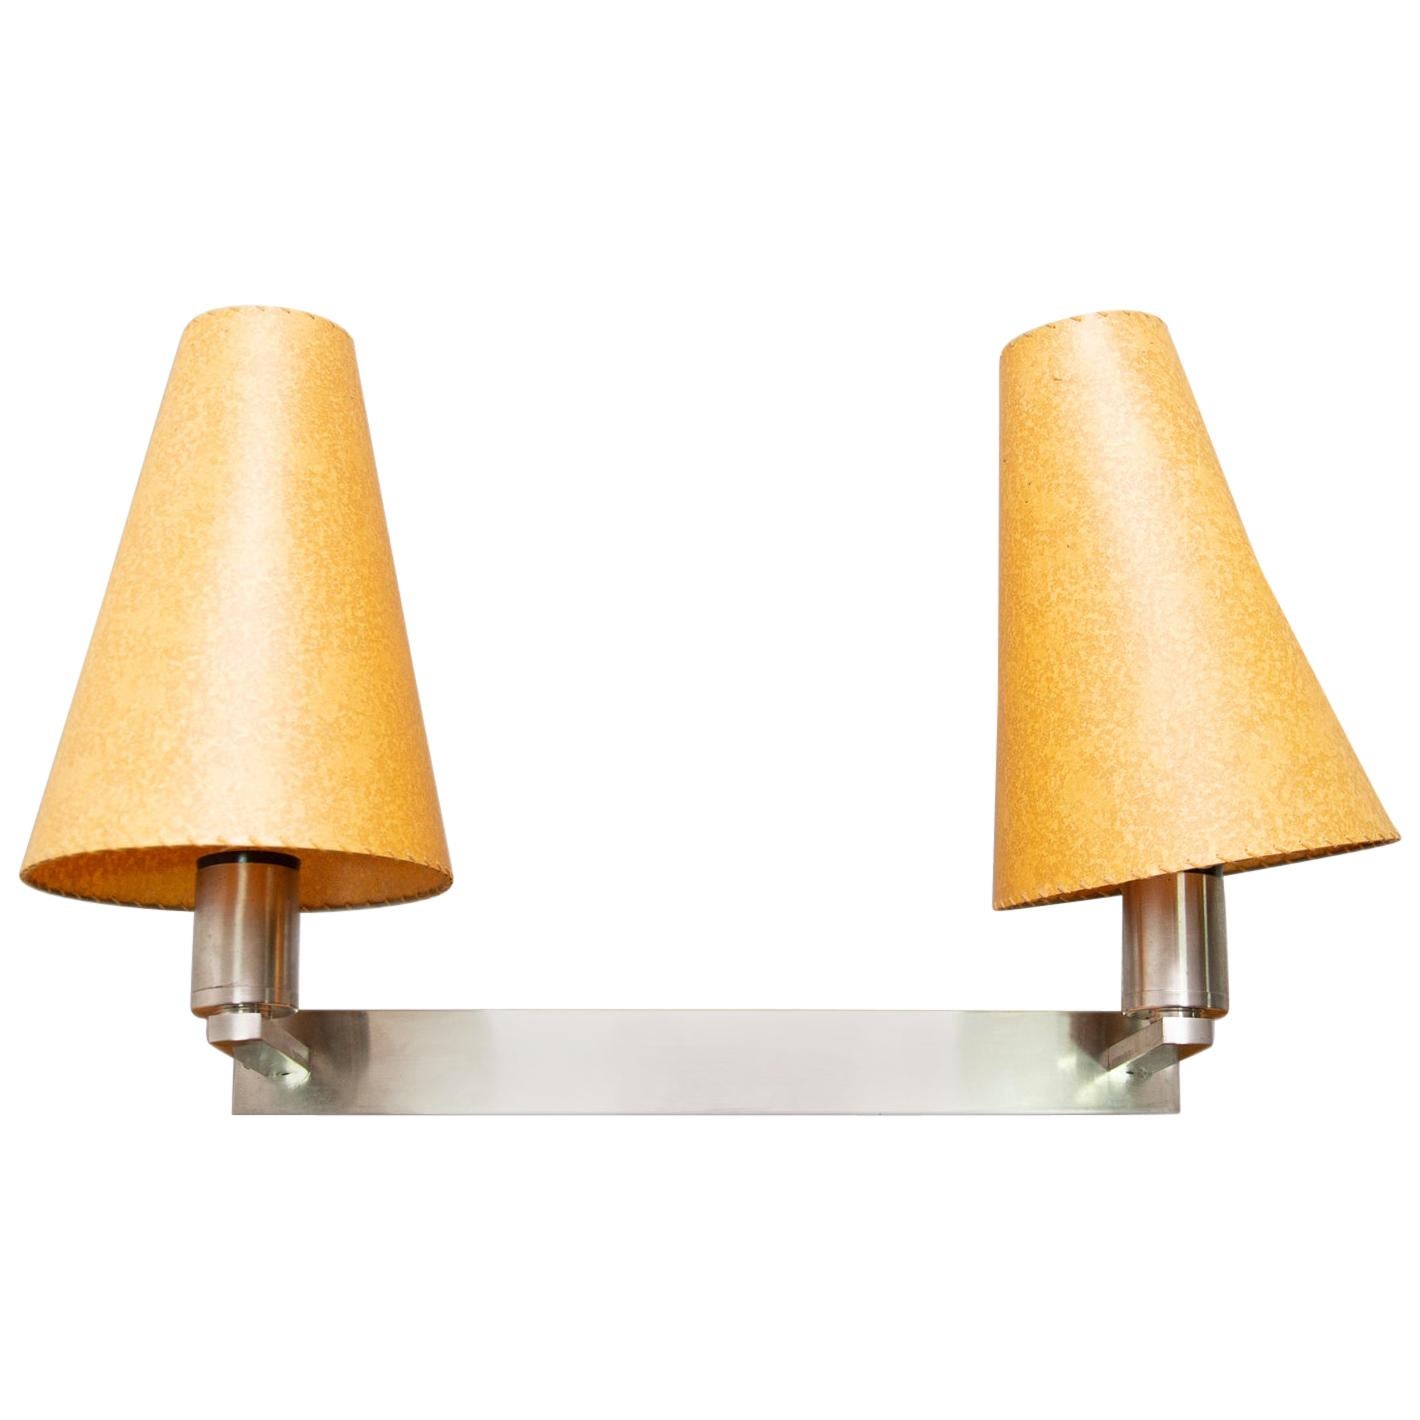 Bauhaus Chromed Wall Lamp with Two Lampshades by Vlastimil Brožek, Czechoslovaki